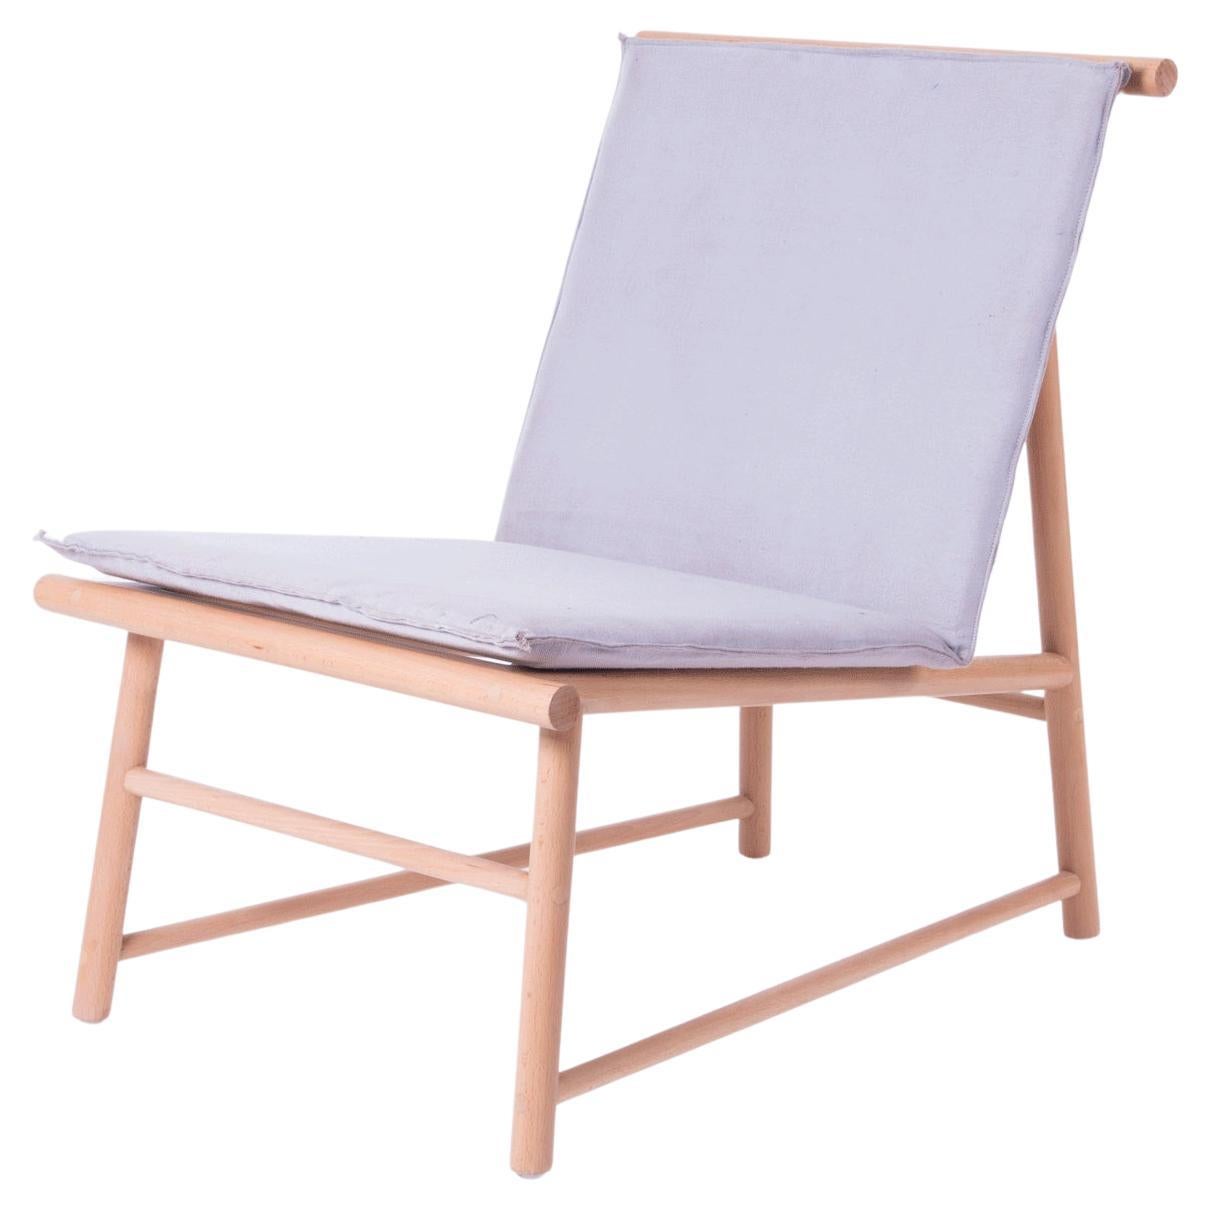 Easy Chair, Lounge Chair in Beech Wood with Fabric Seat